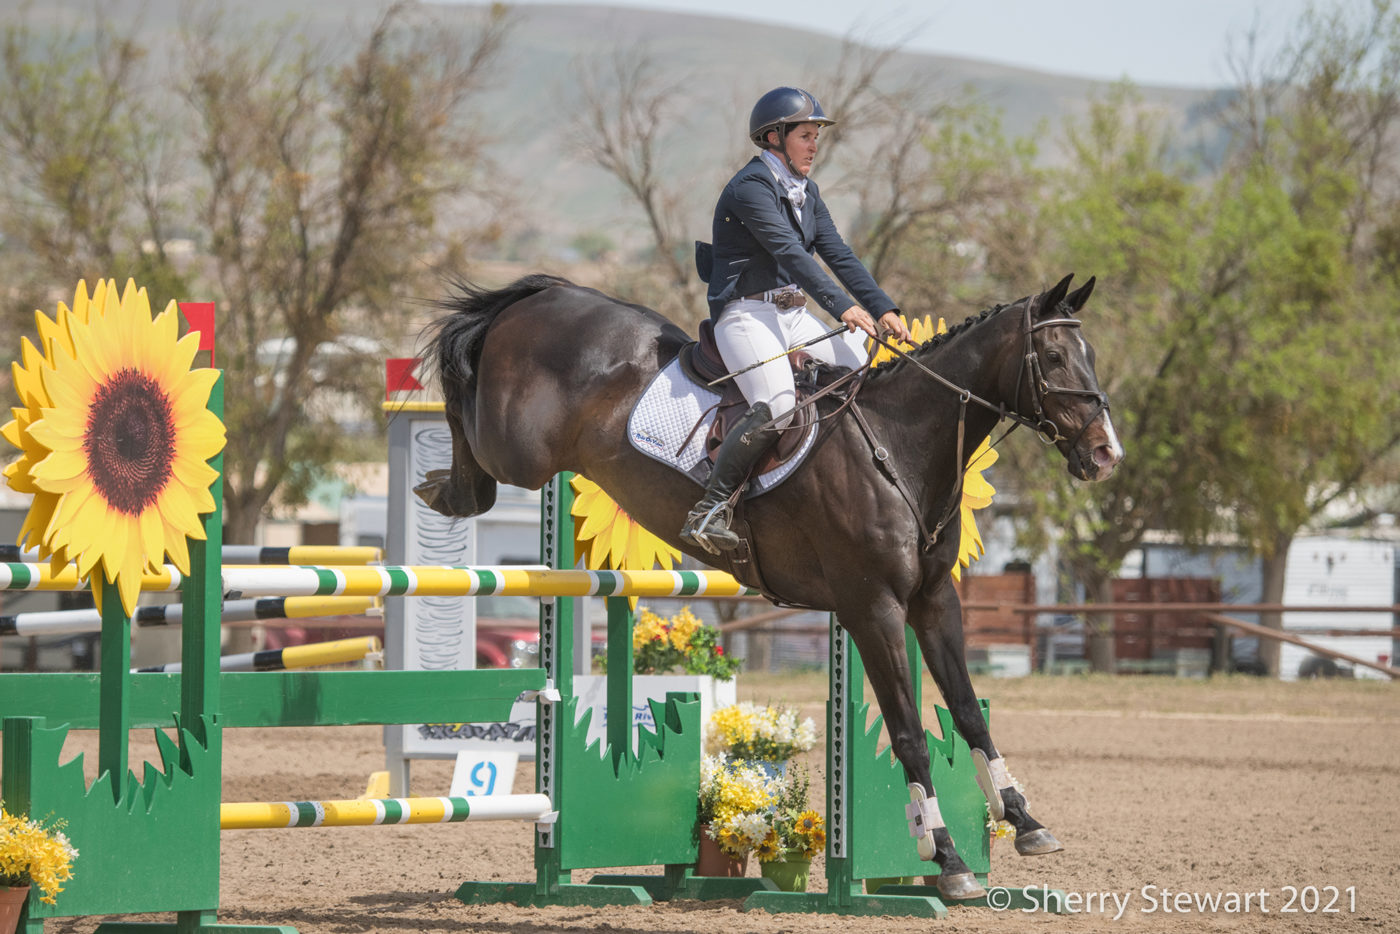 CCI3*-L - 2nd - Alessandra Allen-Shinn and Fool Me Once. Sherry Stewart Photo.